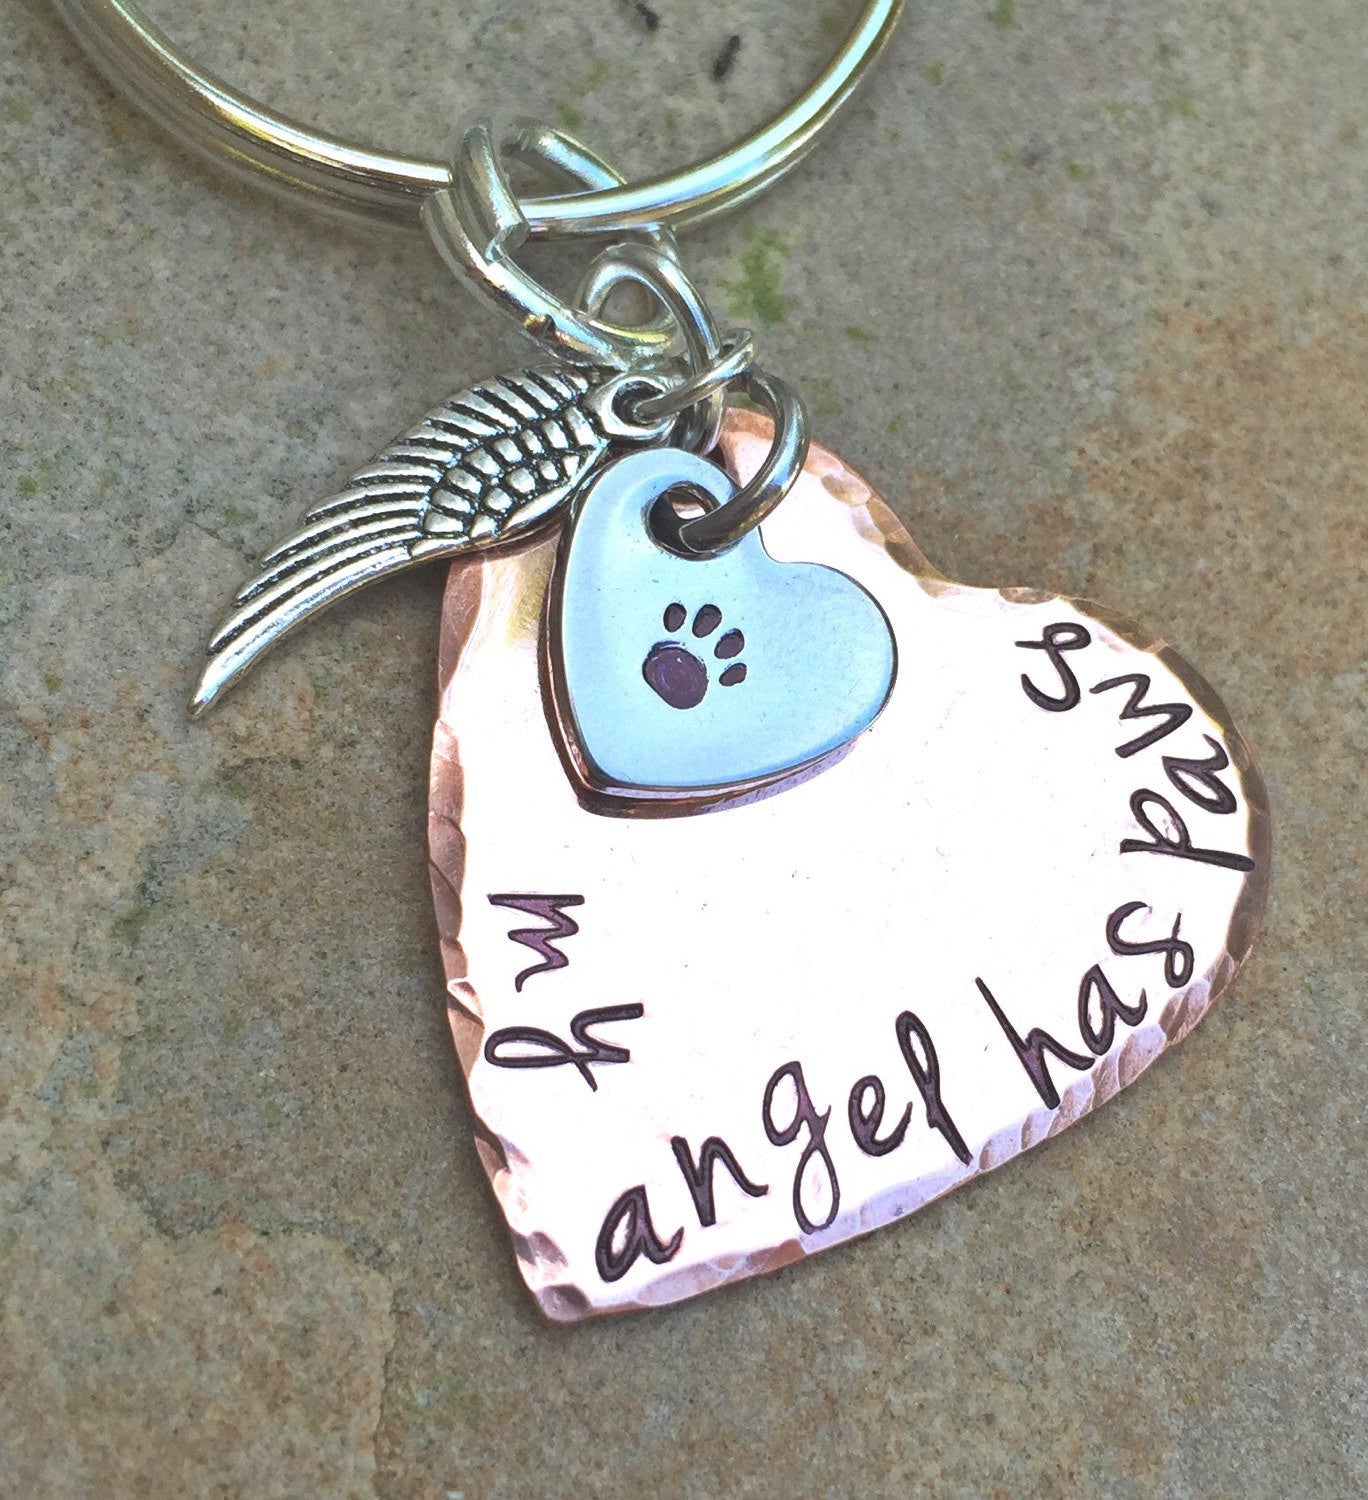 Memorial Pet, My Angel Has Paws, Pet Memorial, Furever in my heart Keychain, miss my pet, sympathy pet gift, Natashaaloha - Natashaaloha, jewelry, bracelets, necklace, keychains, fishing lures, gifts for men, charms, personalized, 